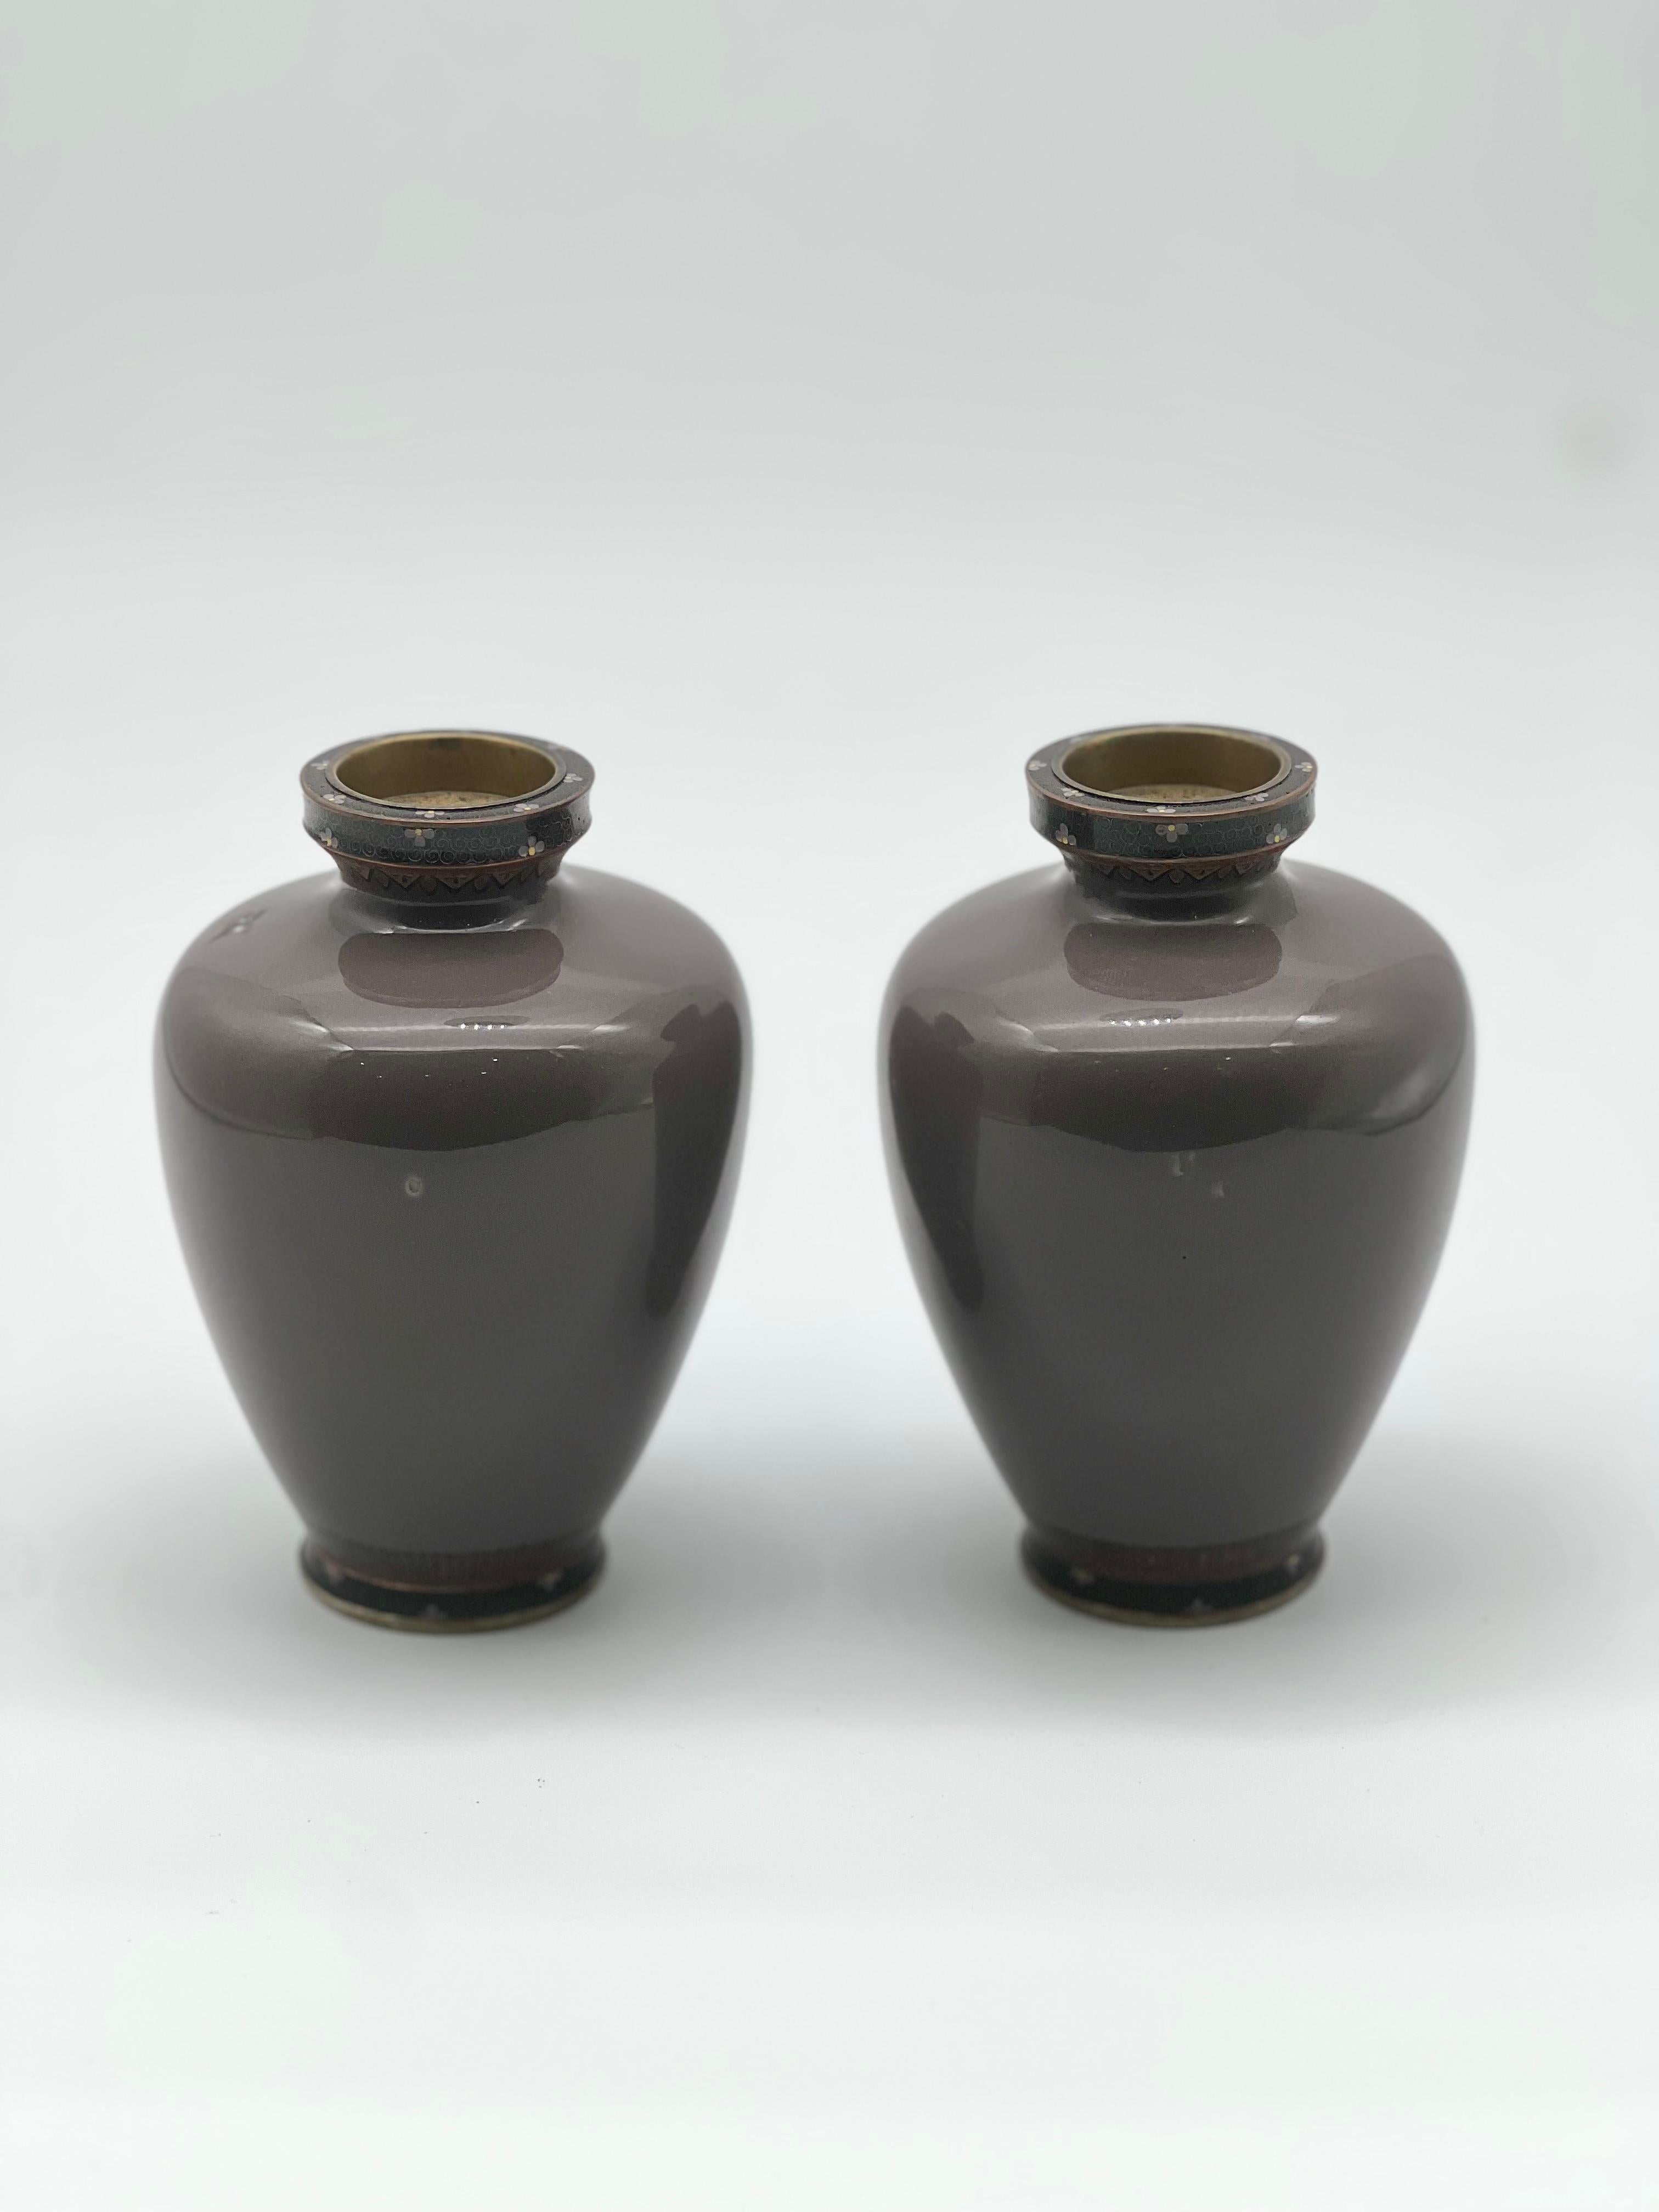 A Fine Pair of Japanese Cloisonne Enamel Vases Attributed to Hayashi Kodenji For Sale 9